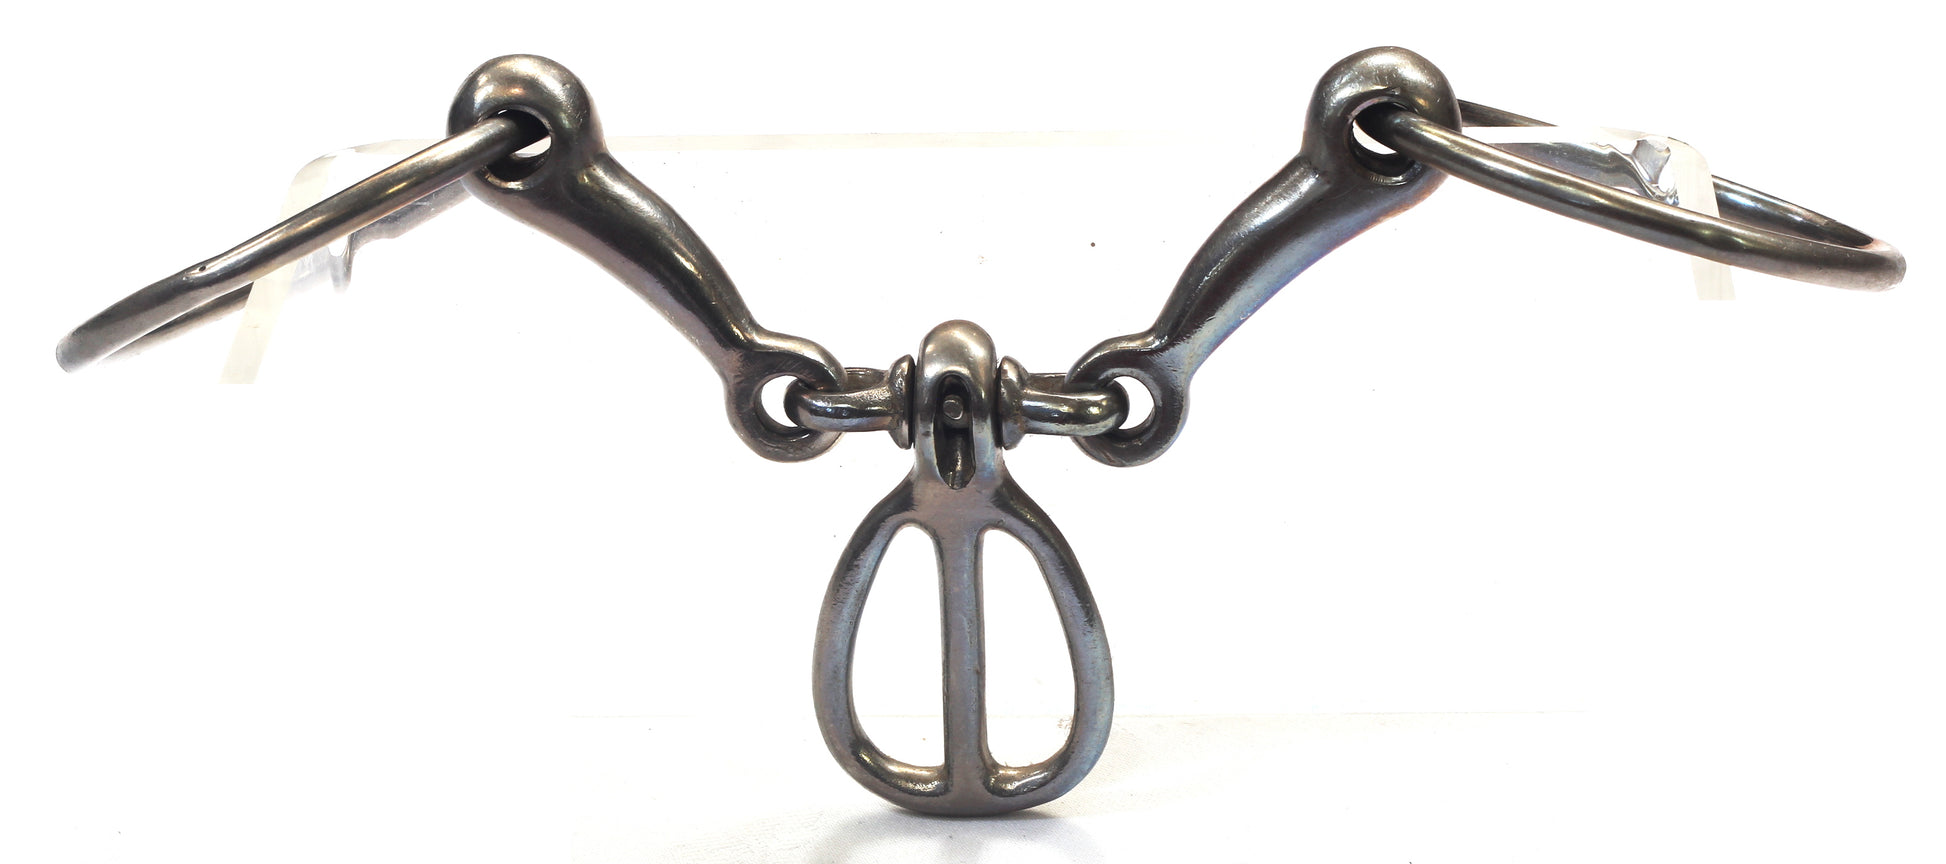 A Nagbutt Snaffle bit with Tongue Grid